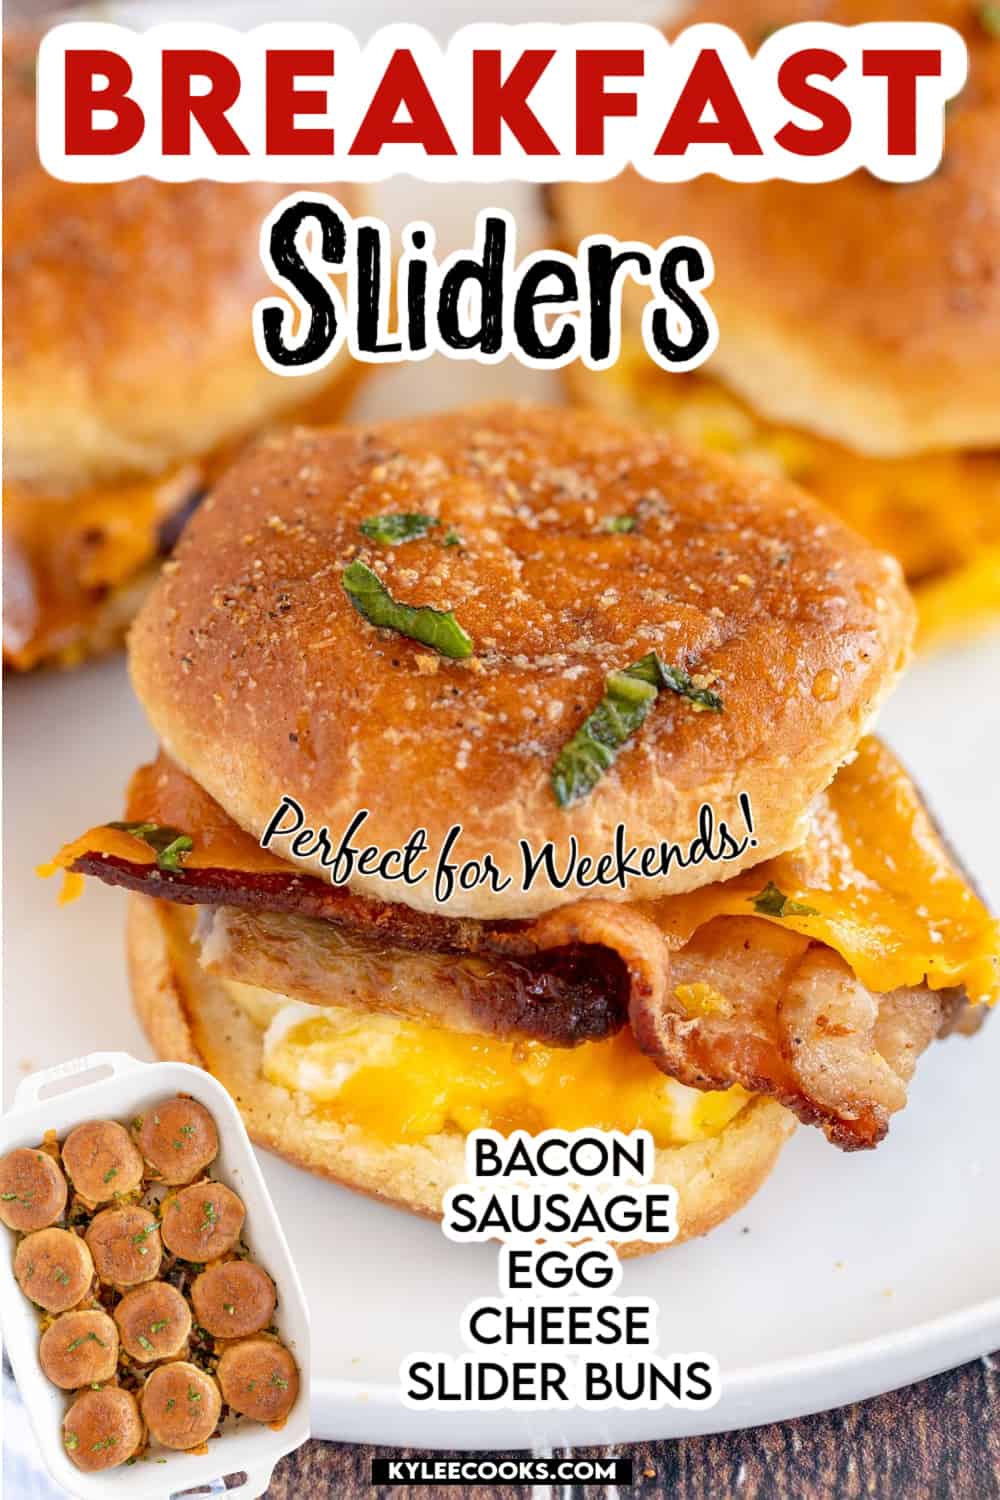 Bacon and egg breakfast sliders with recipe name and ingredients overlaid in text.